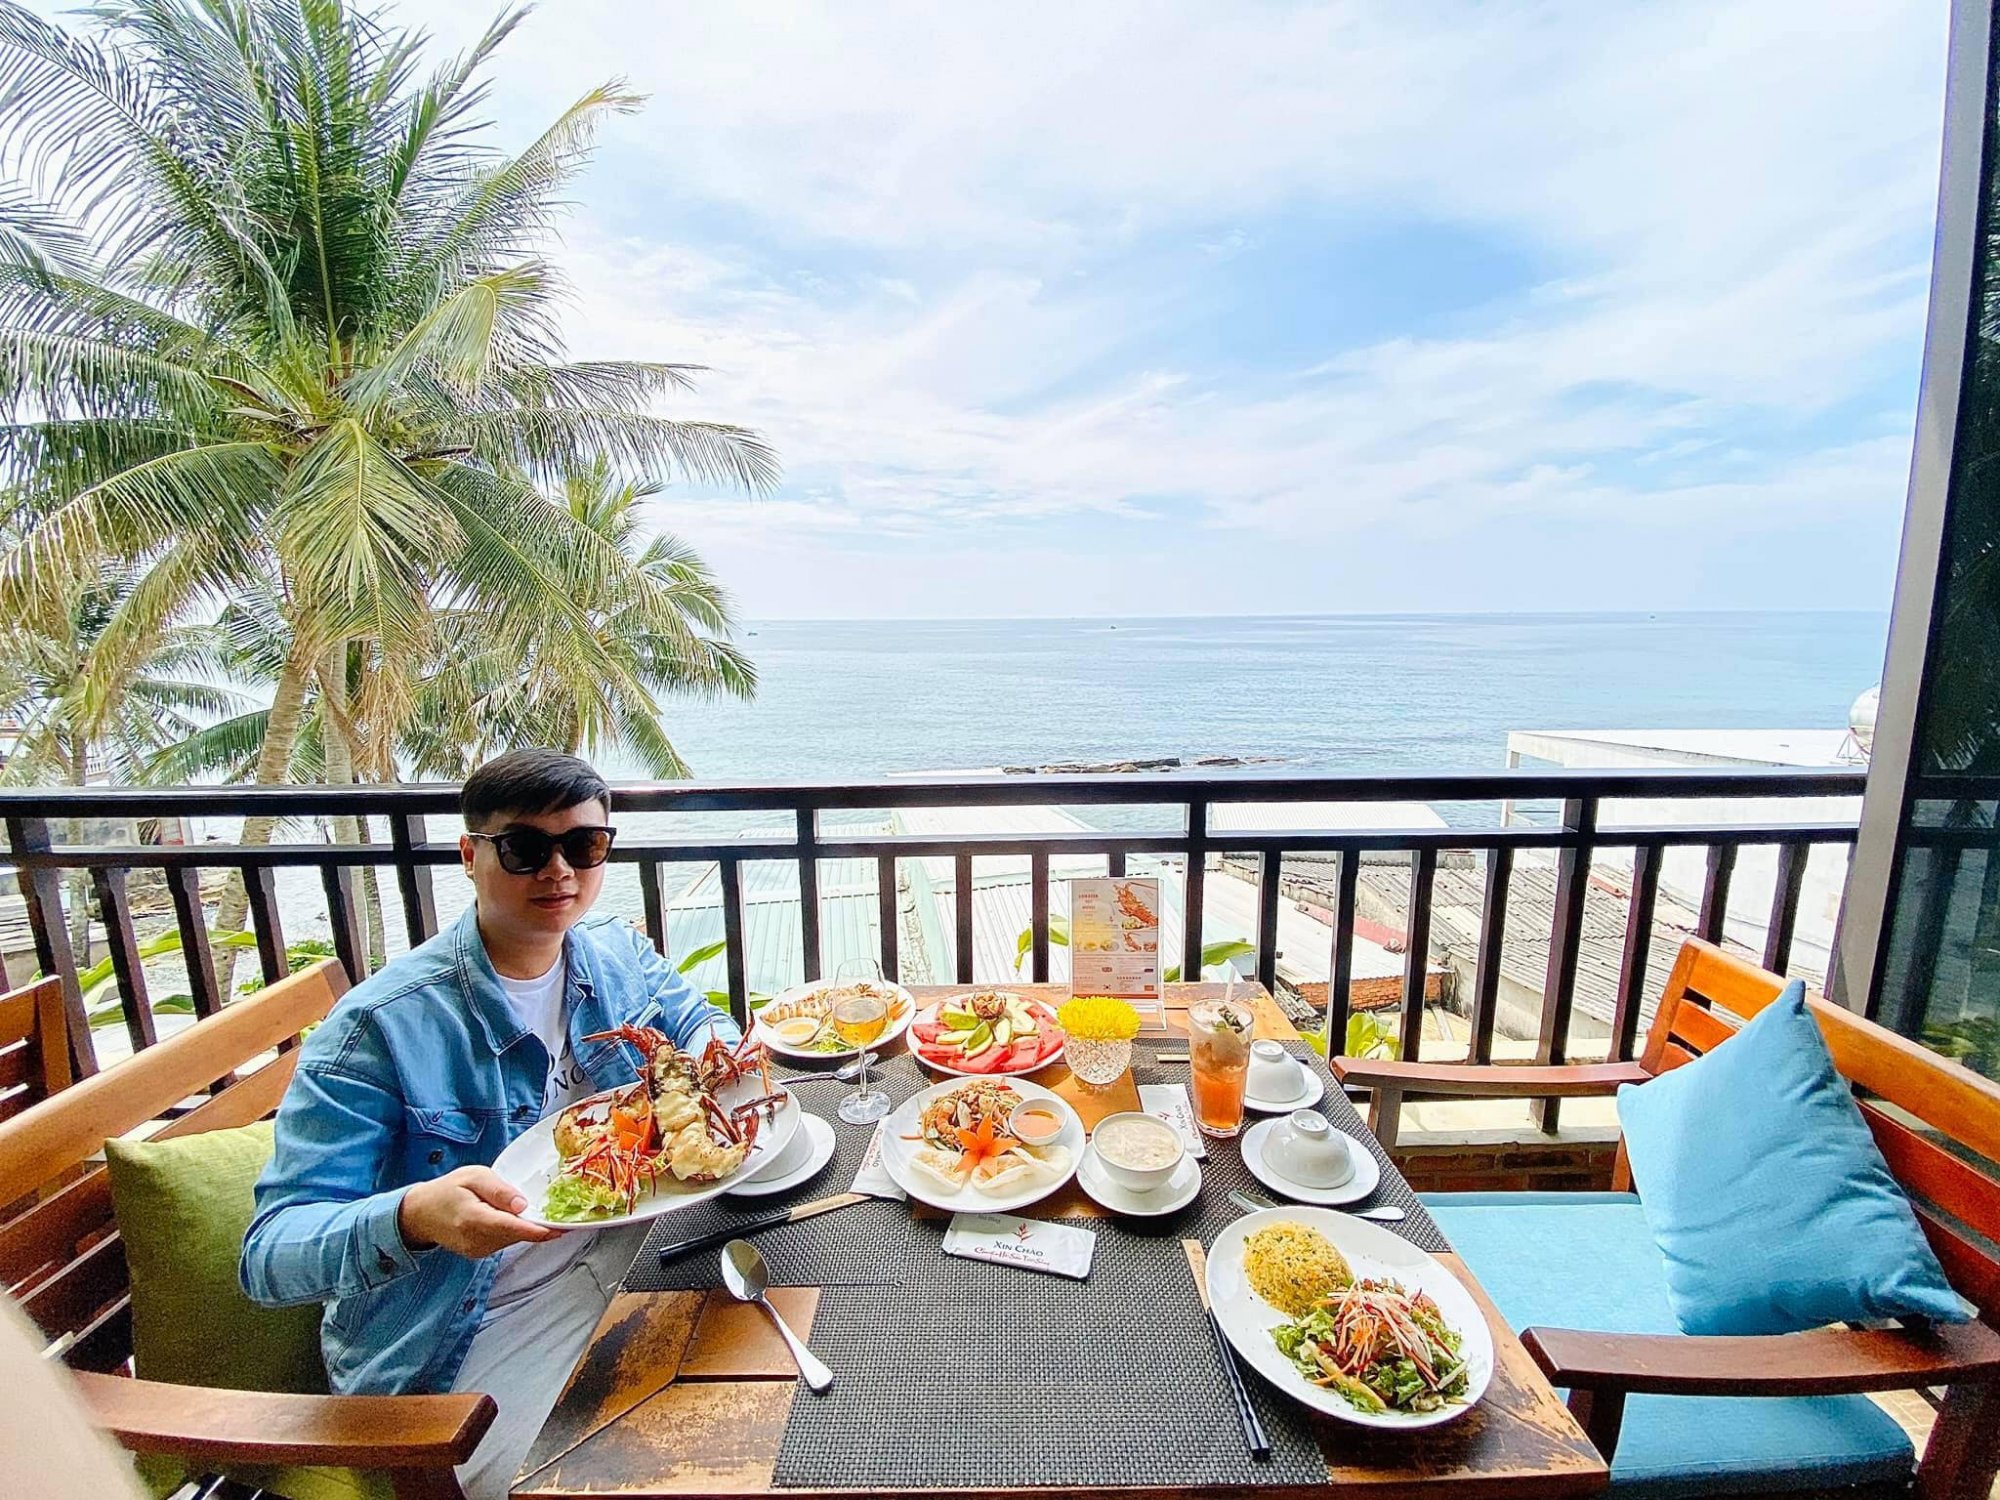 Restaurants in Phu Quoc on Tet holiday are the most crowded